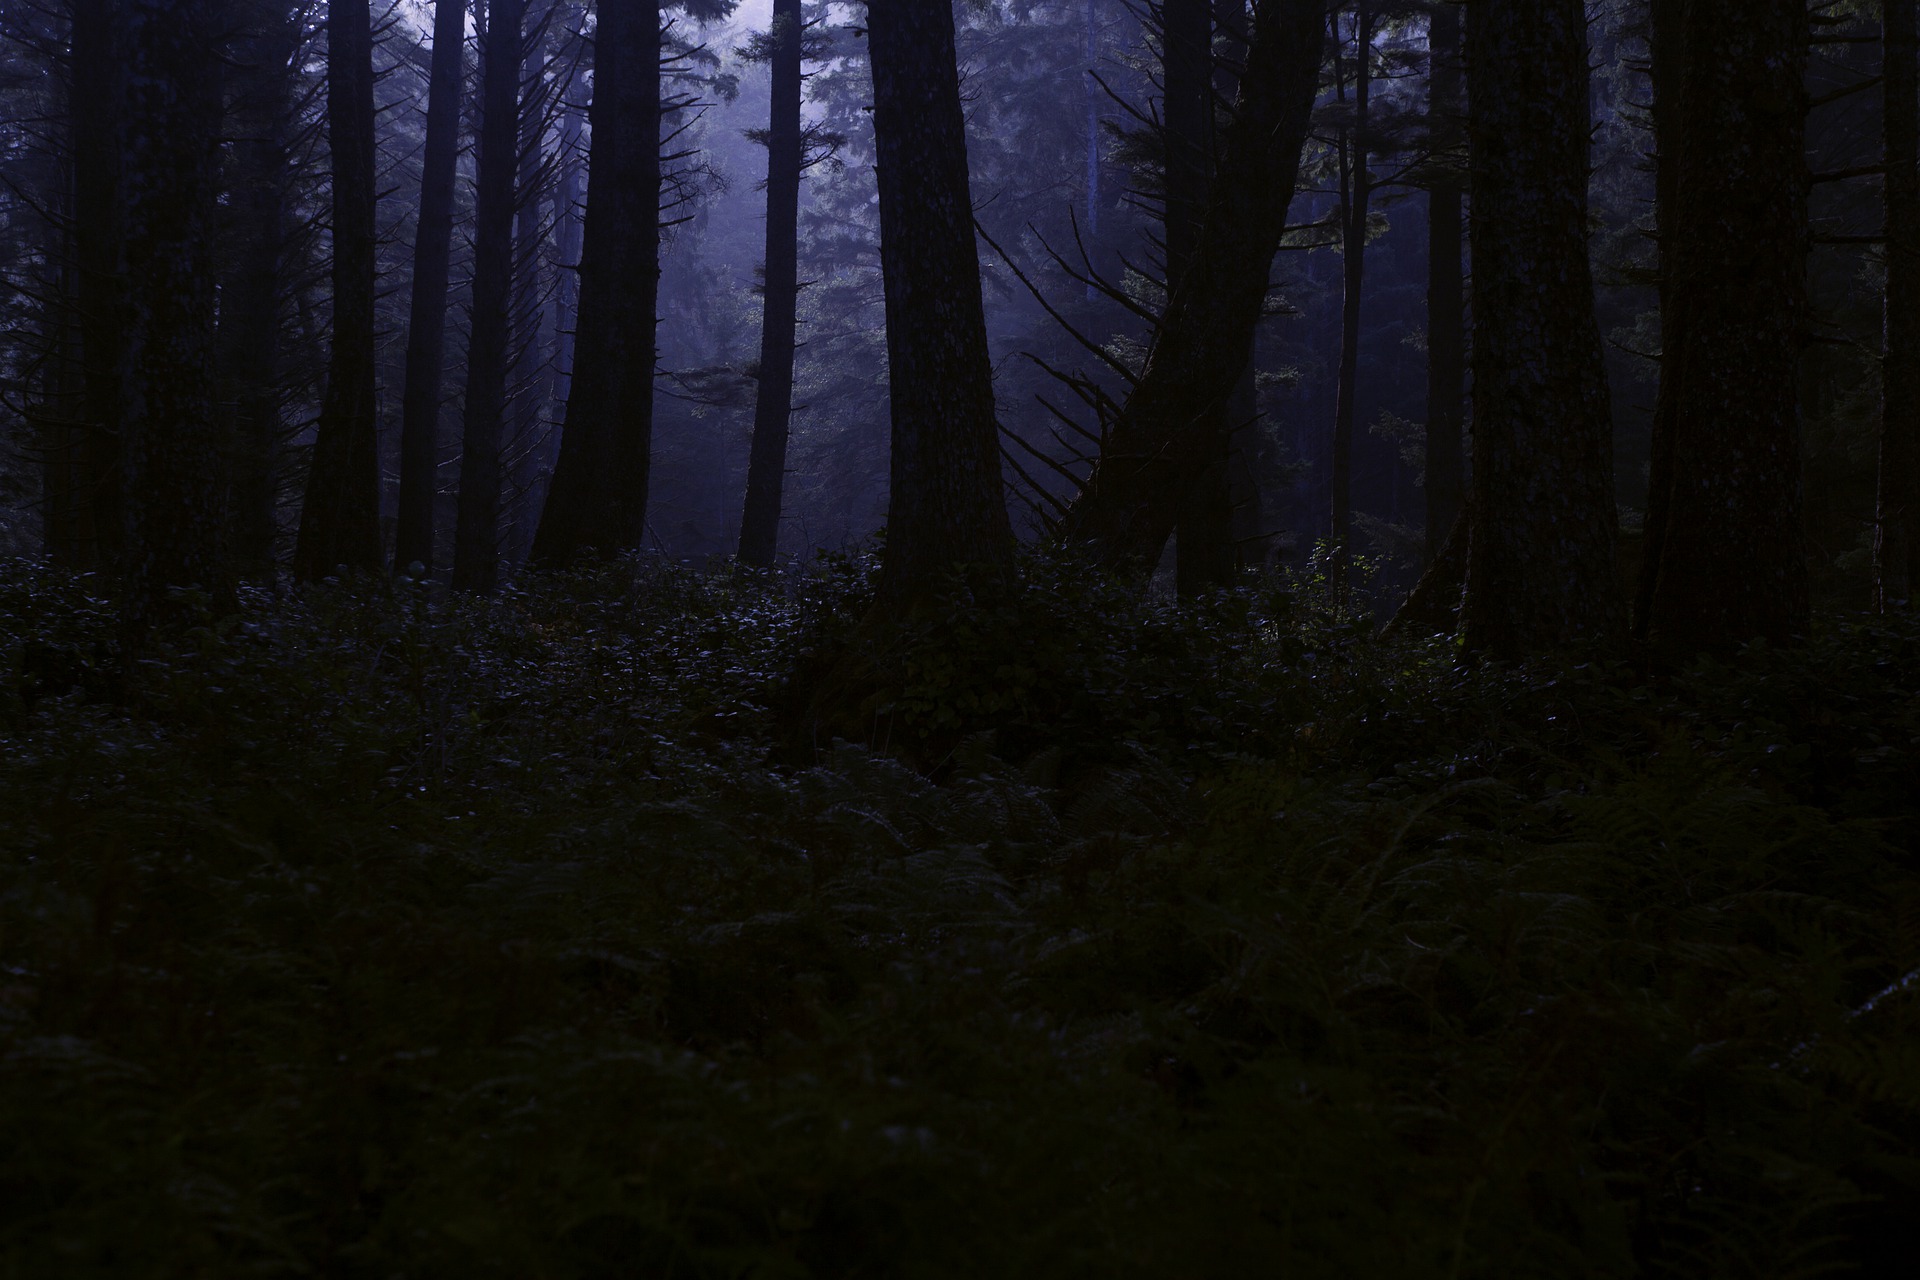 Night Sounds In The Forest